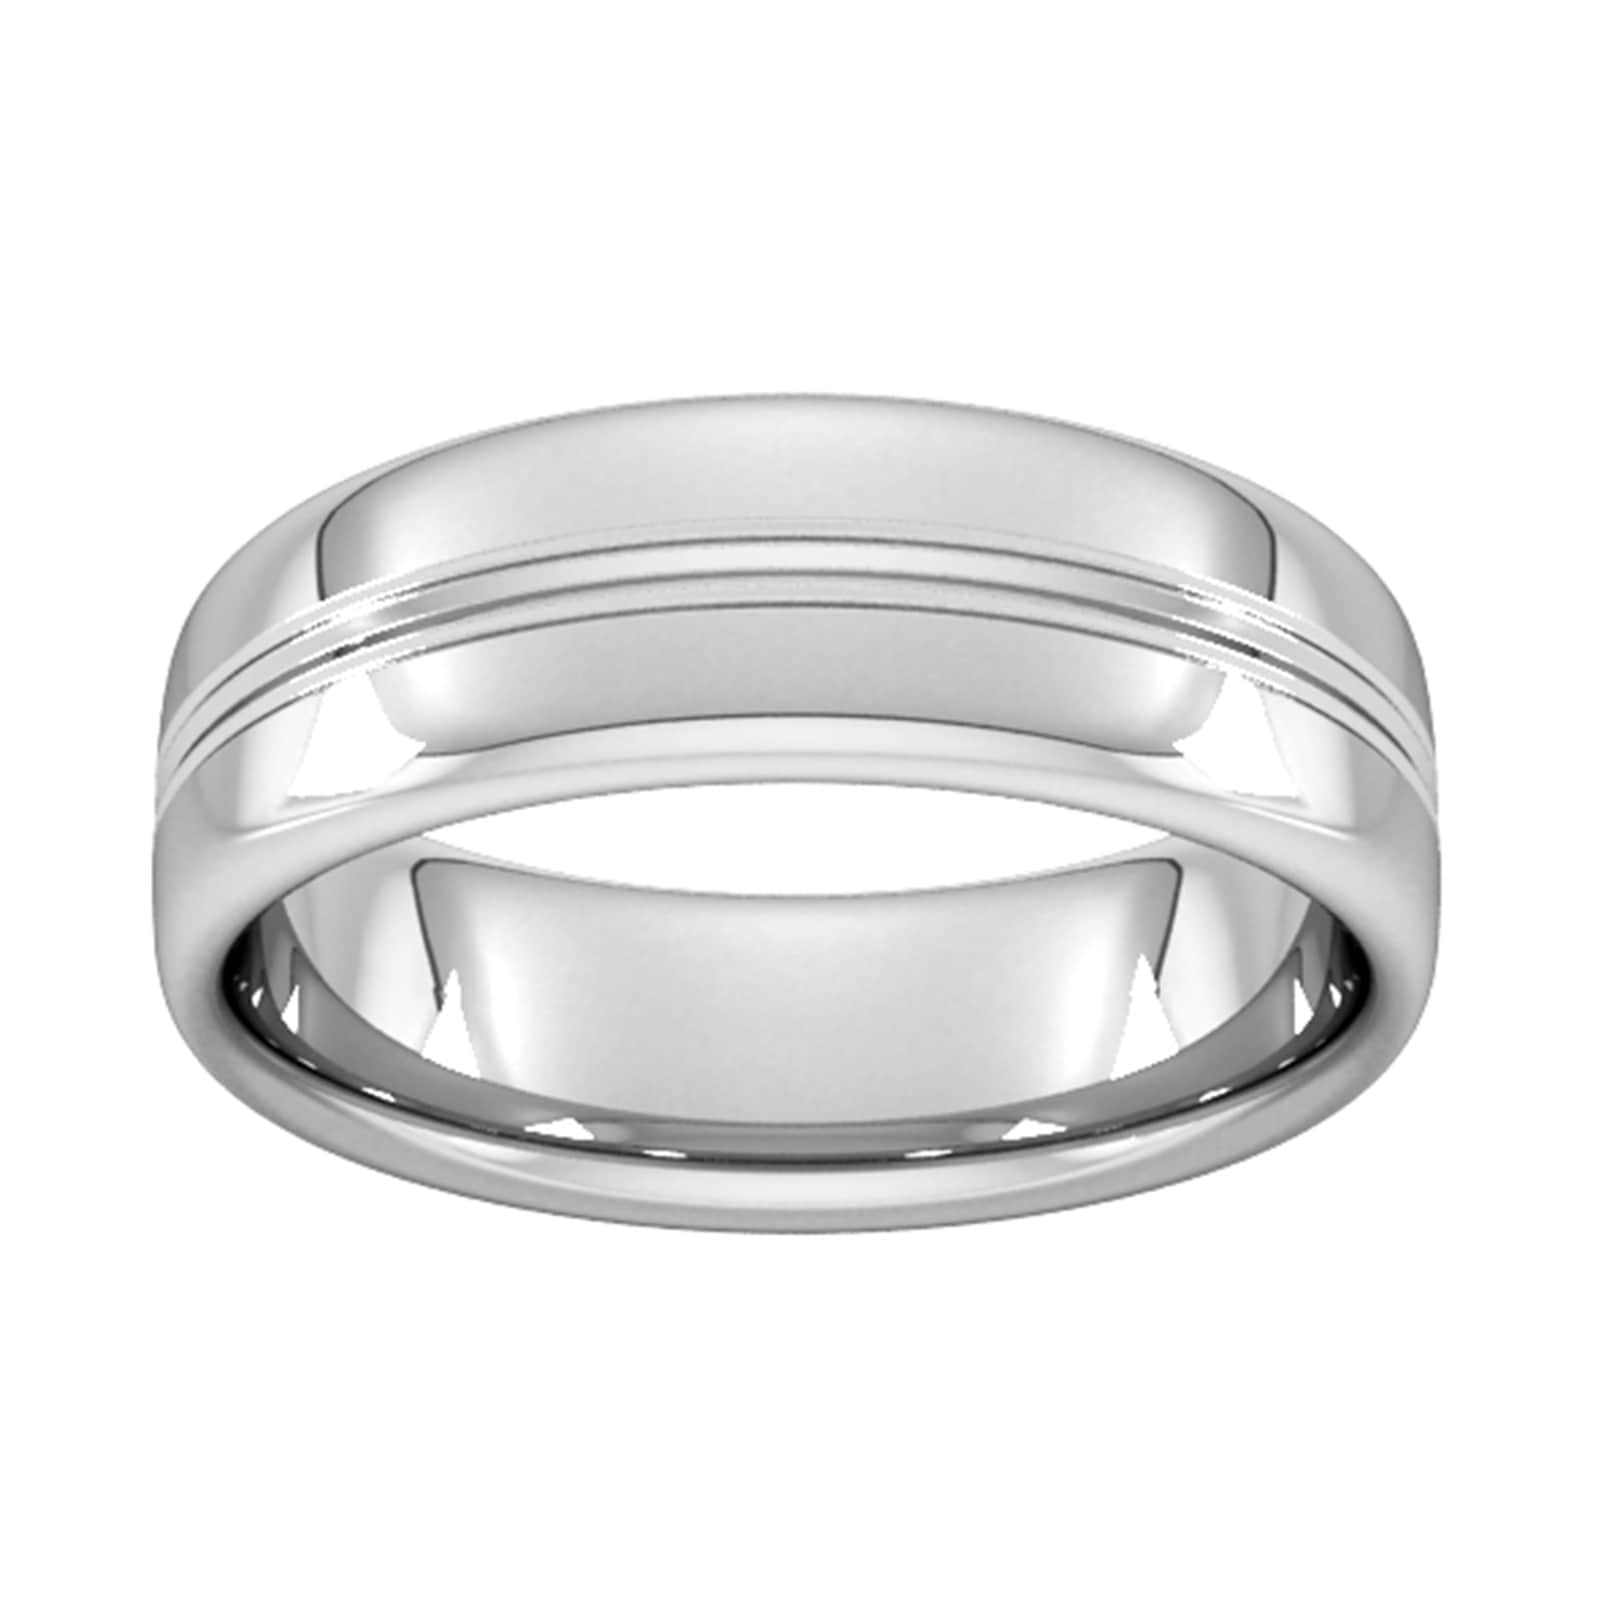 7mm Slight Court Standard Grooved Polished Finish Wedding Ring In 9 Carat White Gold - Ring Size X